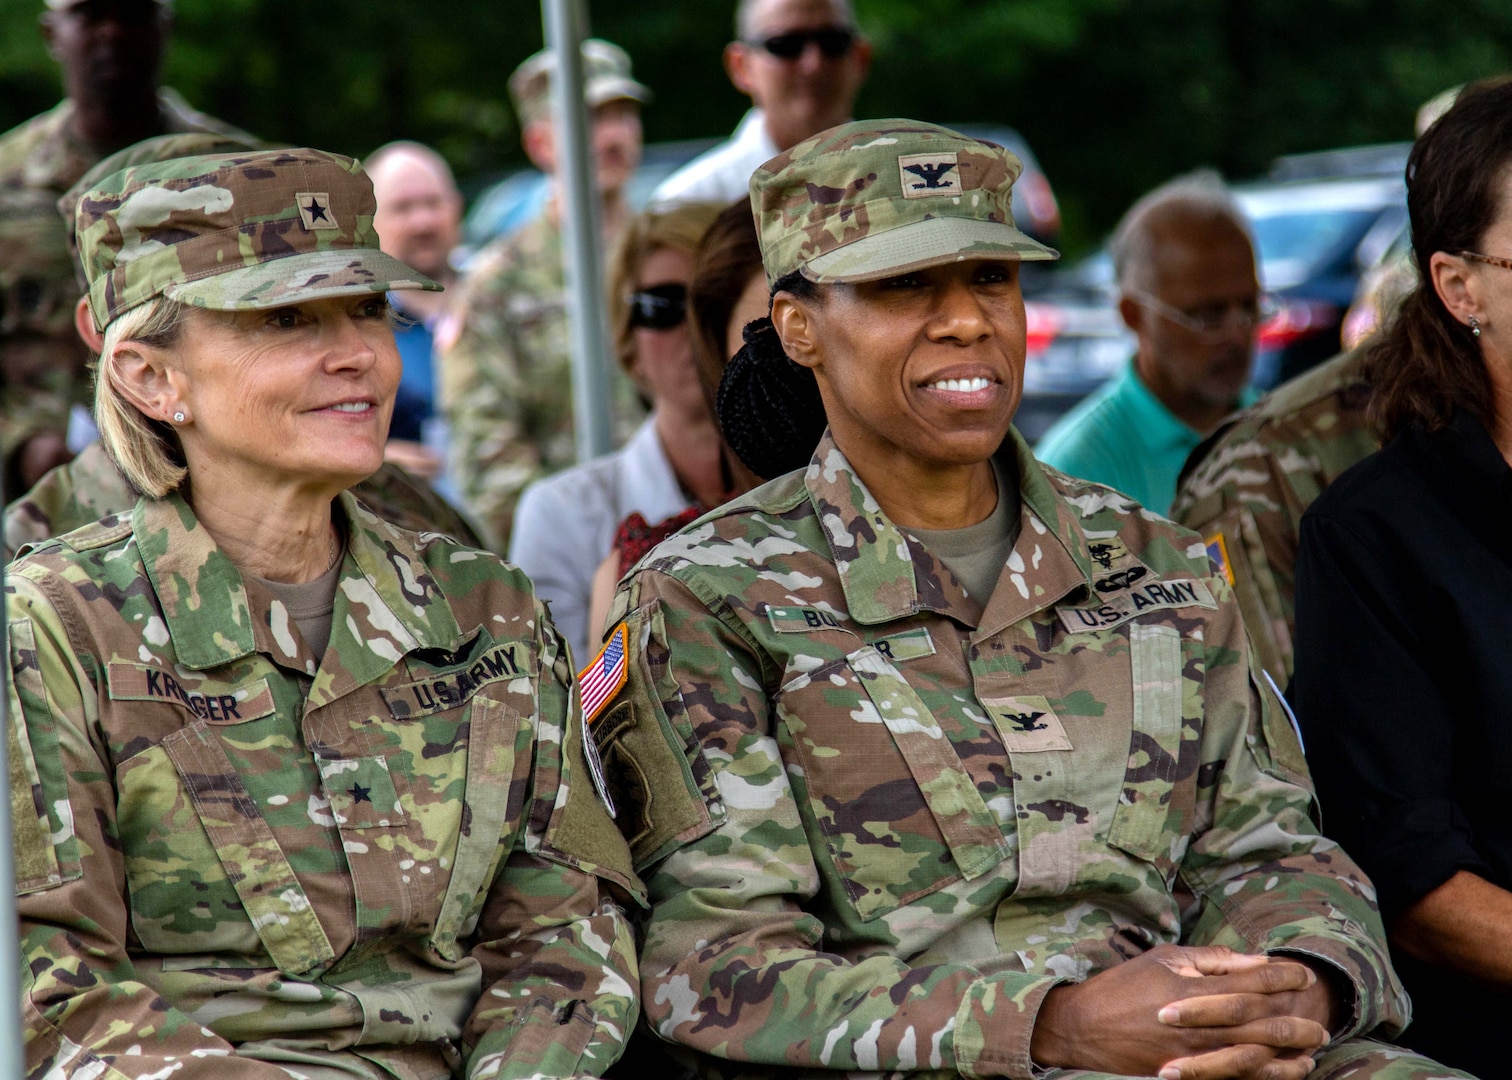 Col. Christina M. Buchner (right), the new commander of the U.S. Army Medical Department Activity, Fort Drum, sits next to Brig. Gen. Mary V. Krueger, commanding general of Medical Readiness Command, East, during the MEDDAC’s change of command ceremony at Memorial Park, Fort Drum, N.Y., July 21, 2023.